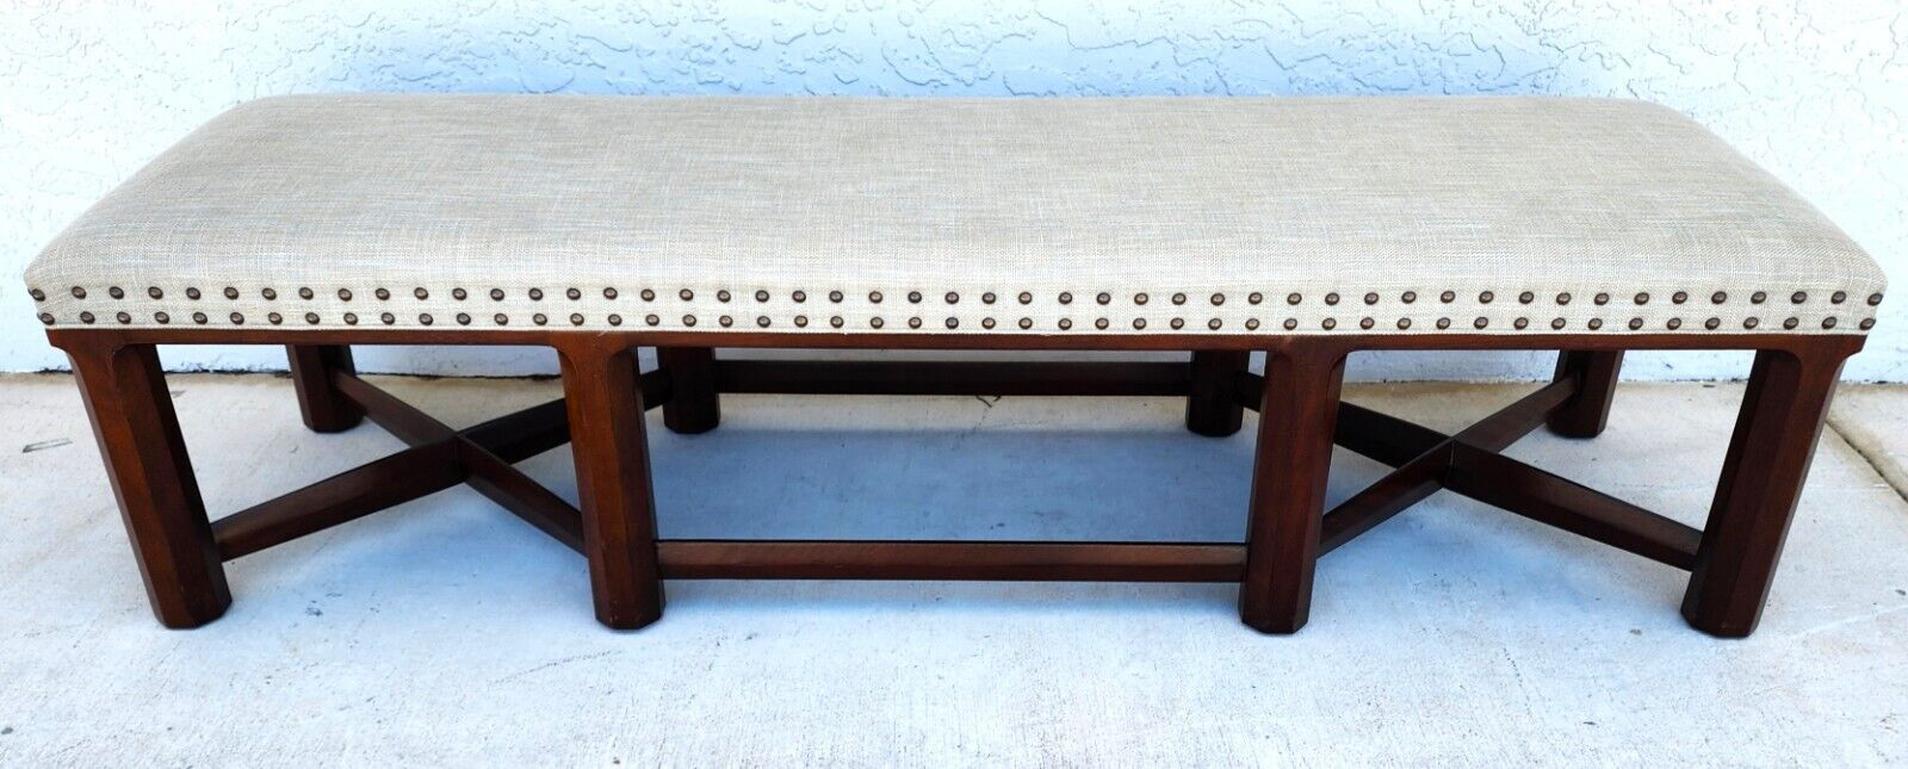 For FULL item description click on CONTINUE READING at the bottom of this page.

Offering One Of Our Recent Palm Beach Estate Fine Furniture Acquisitions Of A 
Huge Solid Wood Trestle Bench

Featuring a solid wood base, and cotton fabric